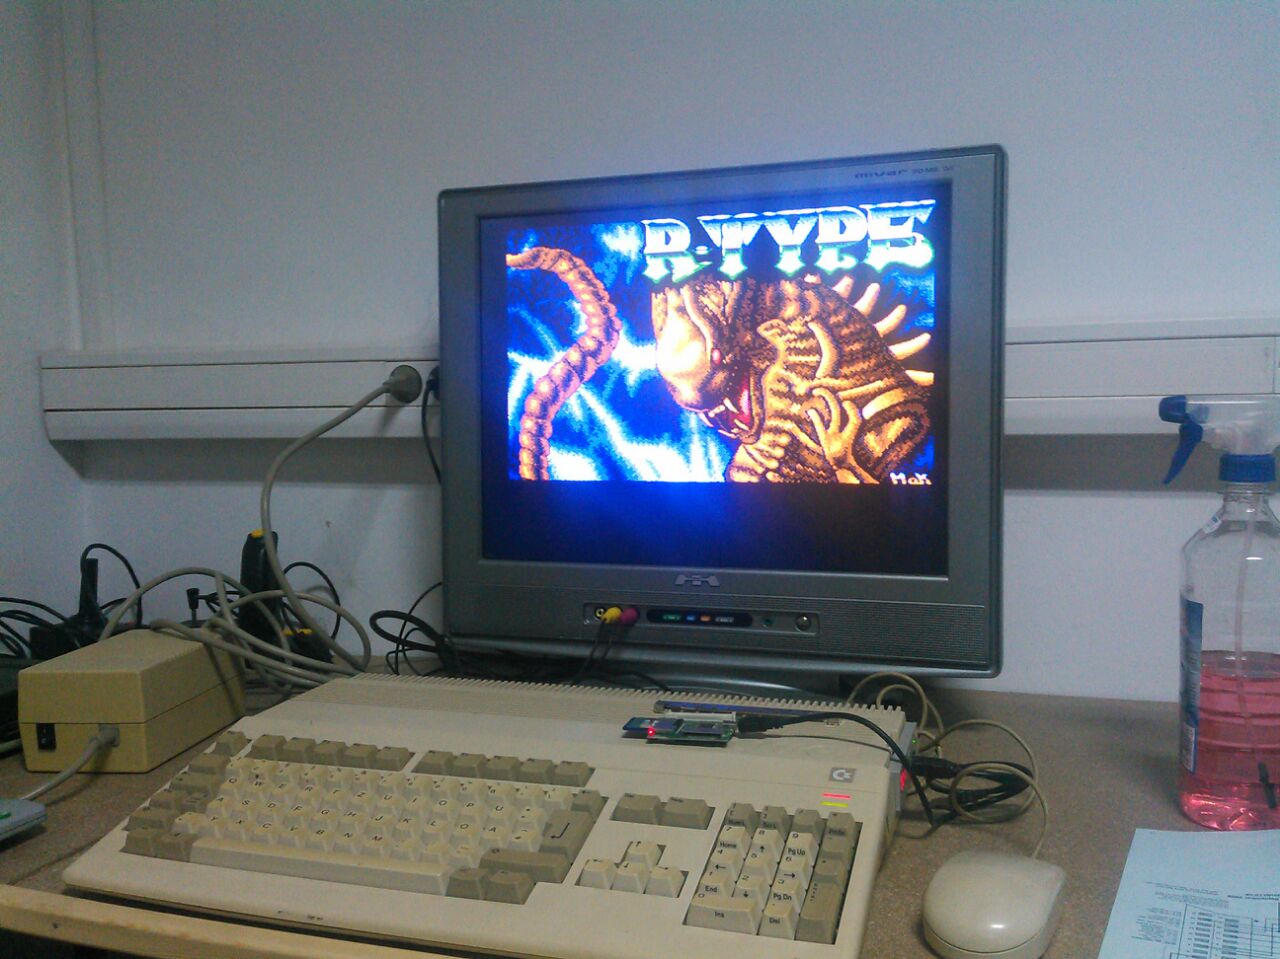 Amiga running a disk image with the floppy emulator